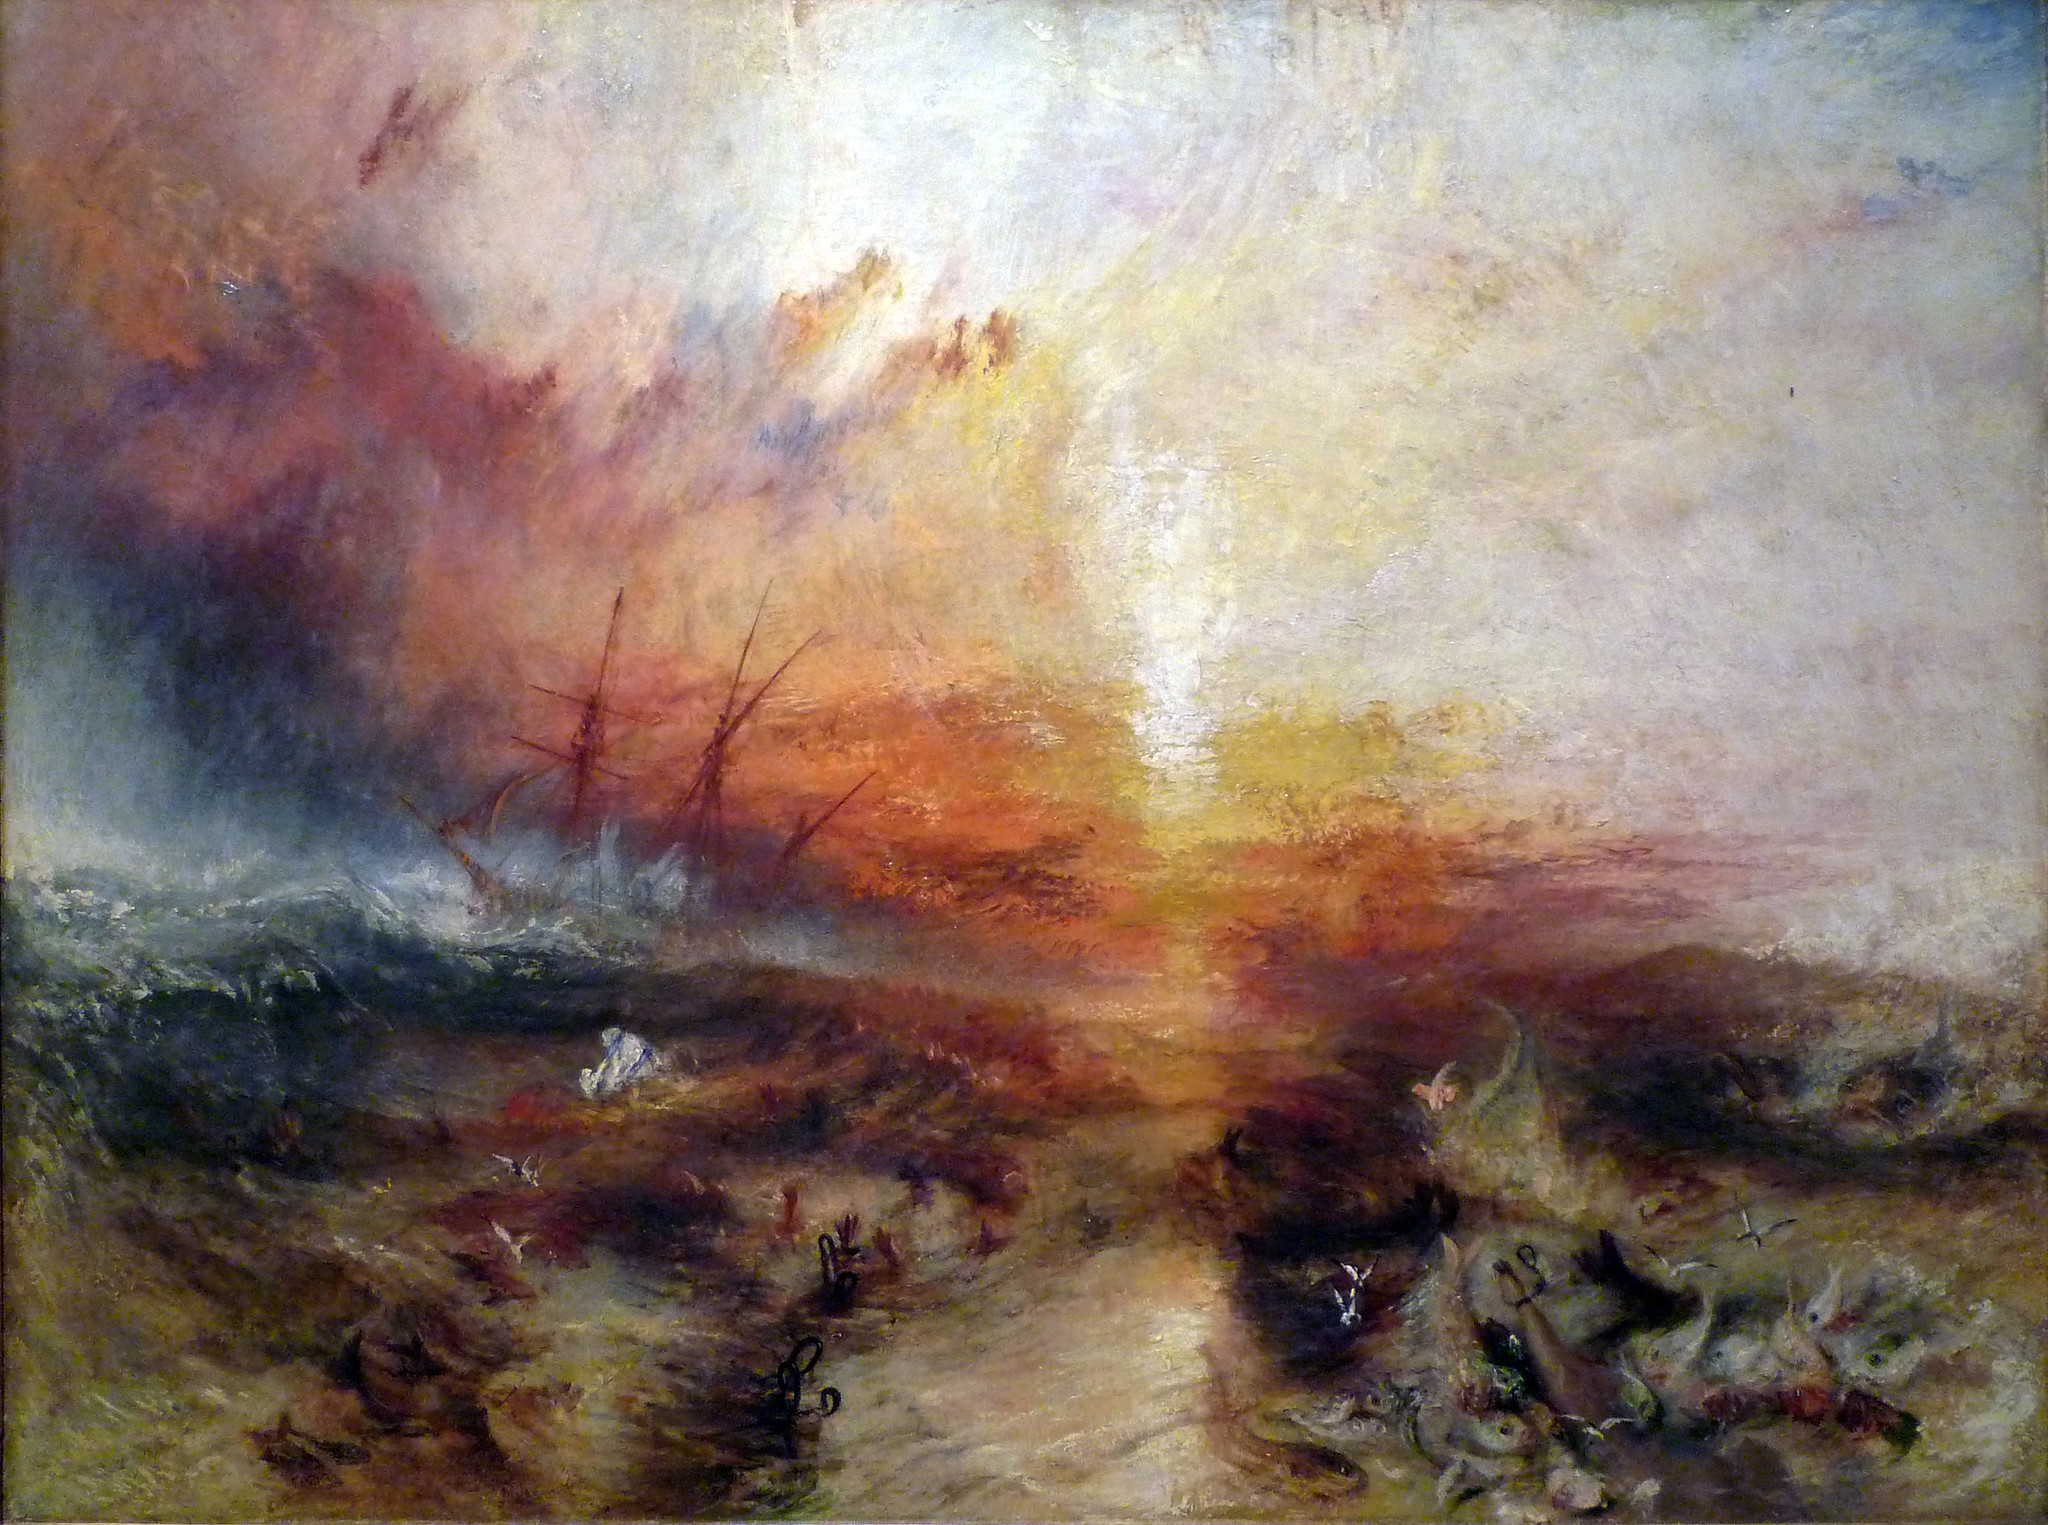 Joseph Mallord William Turner, Slave Ship (Slavers Throwing Overboard the Dead and Dying, Typhoon Coming On), 1840, oil on canvas, 90.8 x 122.6 cm (Museum of Fine Arts, Boston)